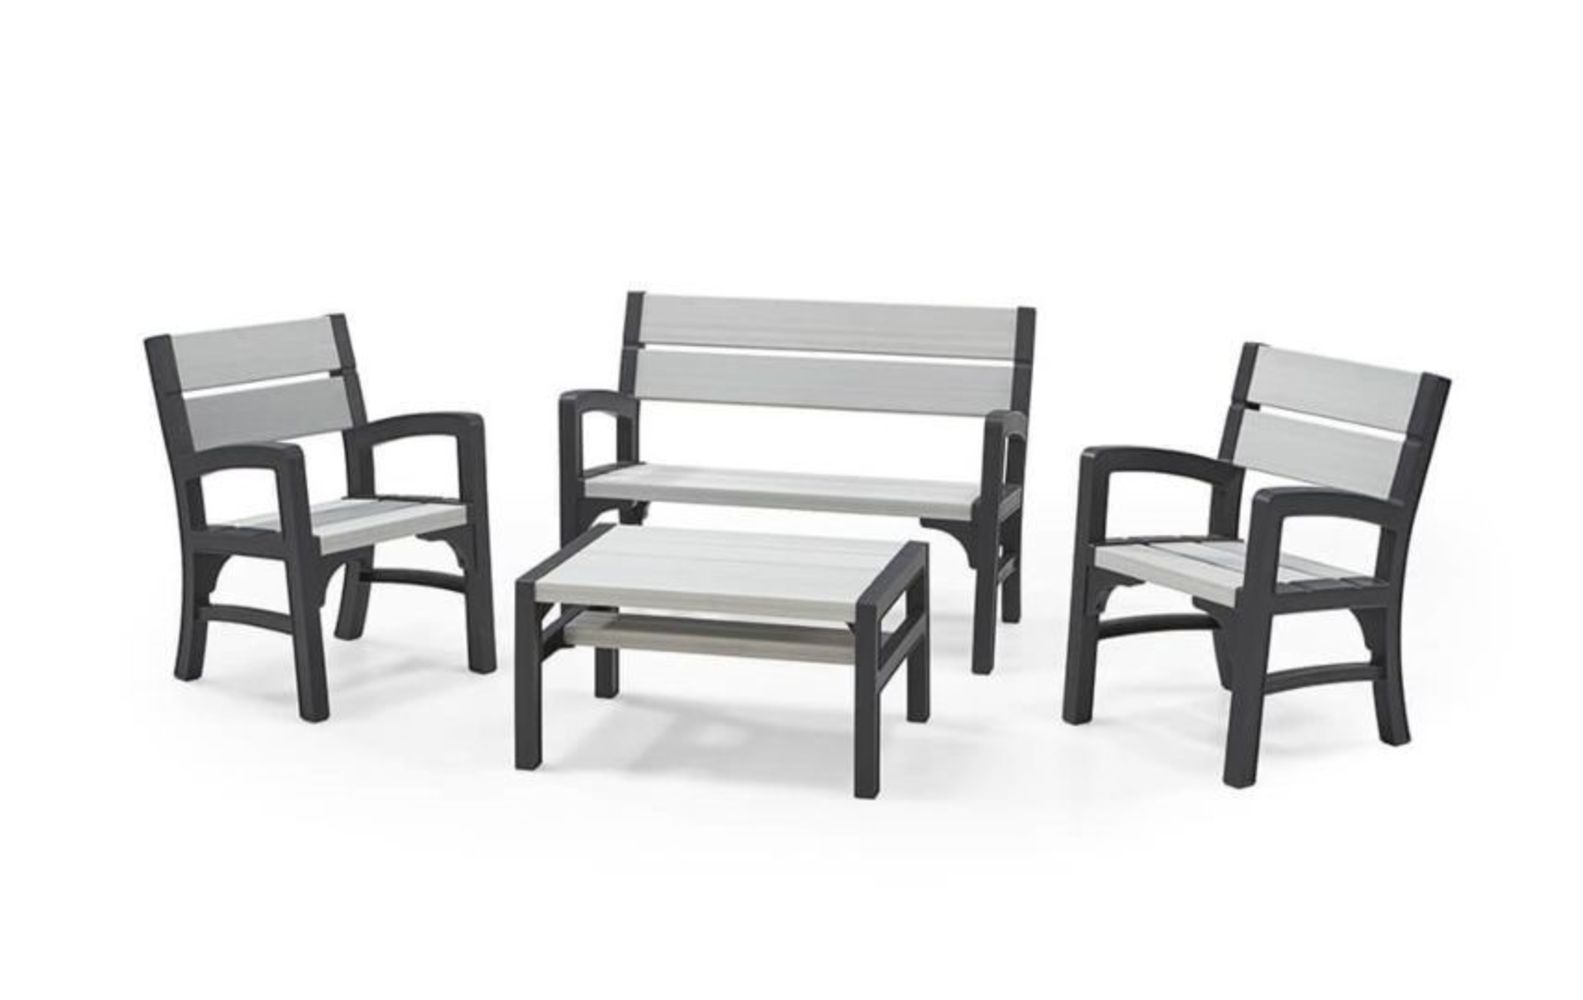 Keter Outdoor Seating sets, new and still boxed